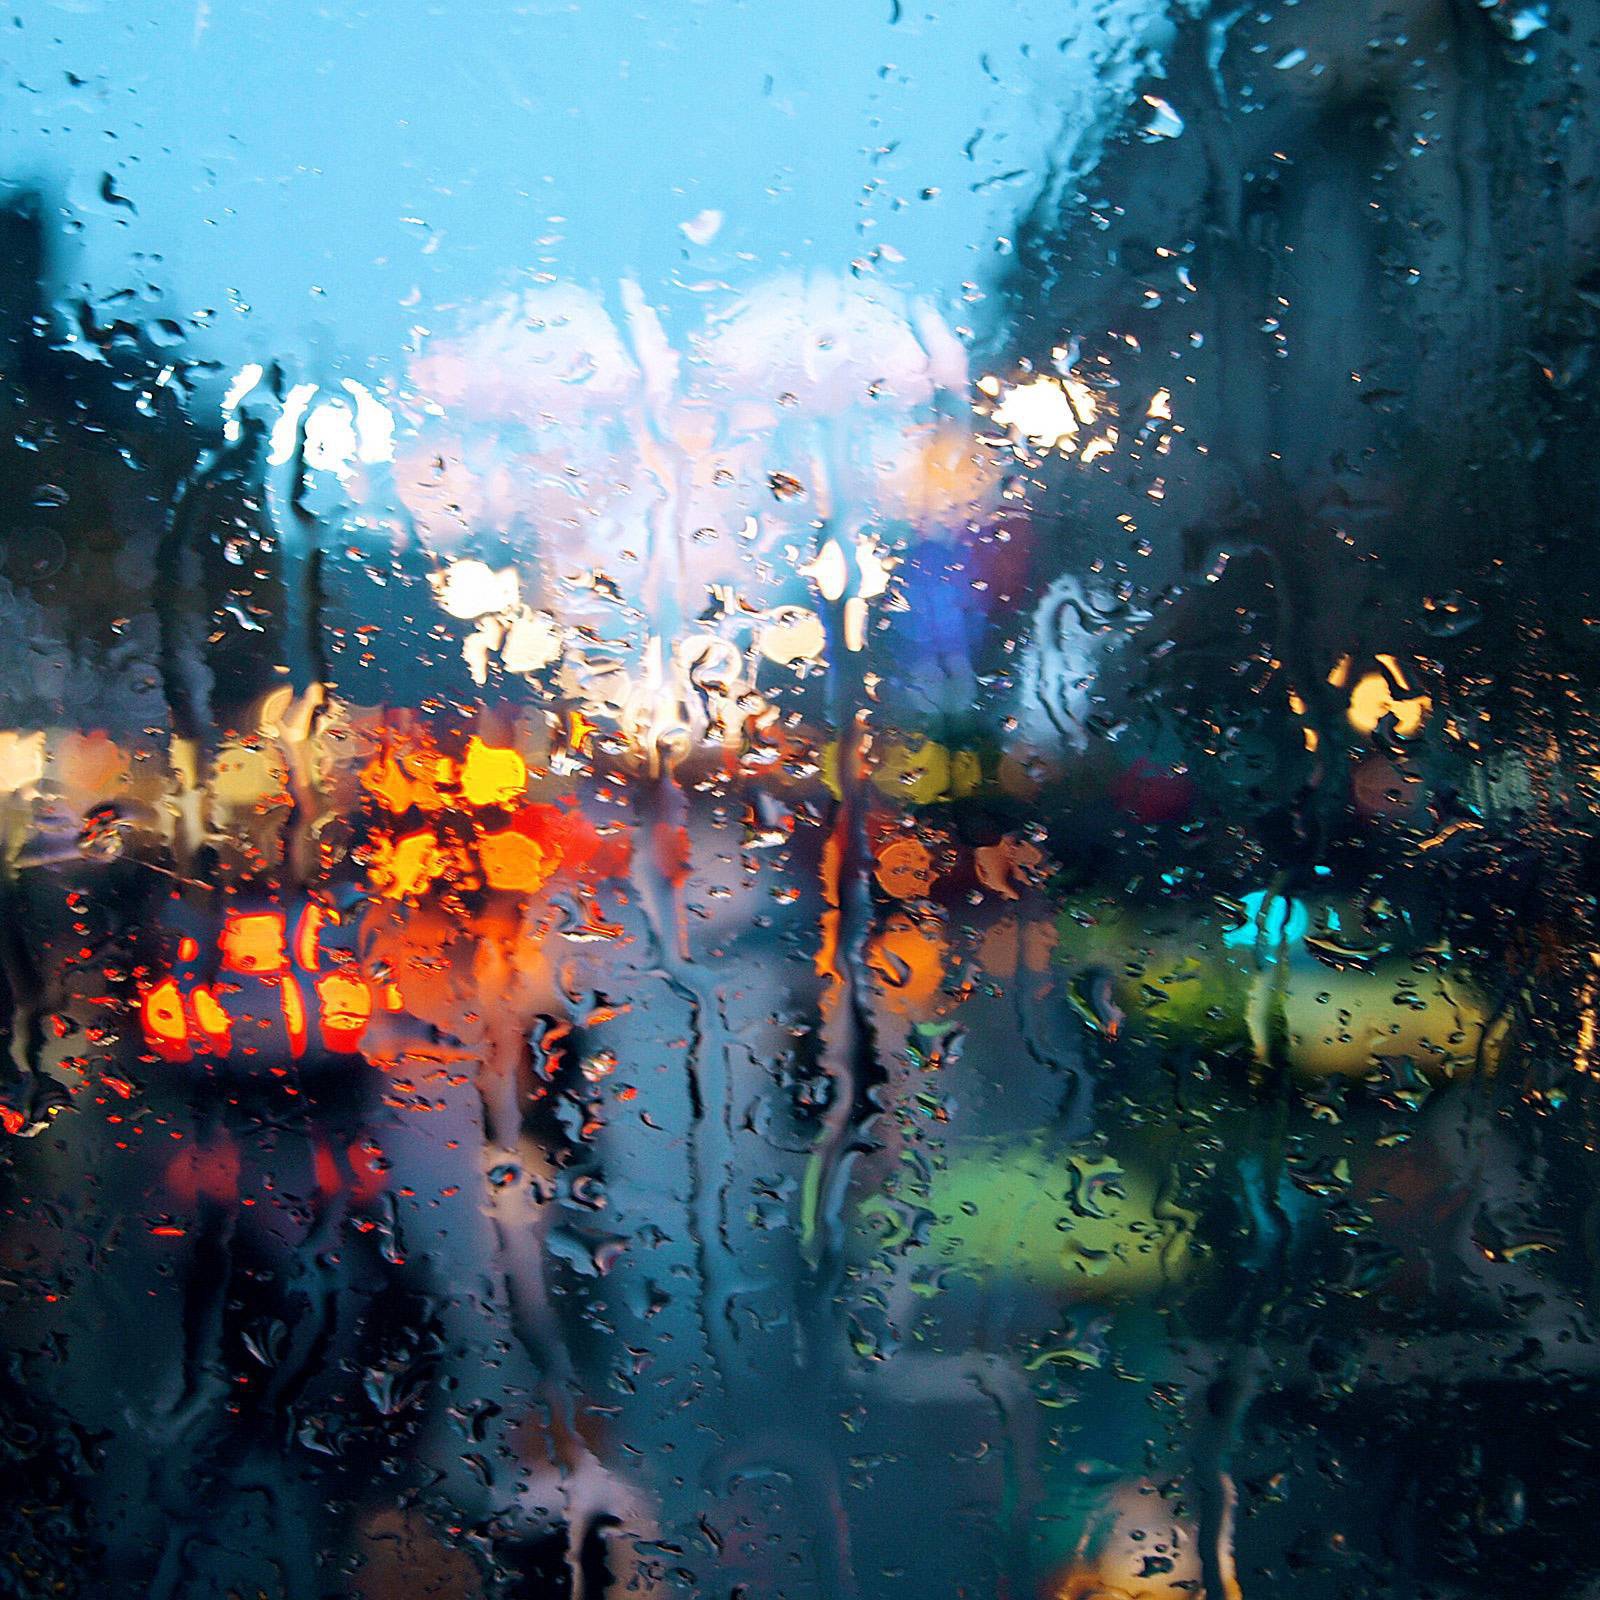 Arts Playlist: Songs for a Rainy Day, Arts